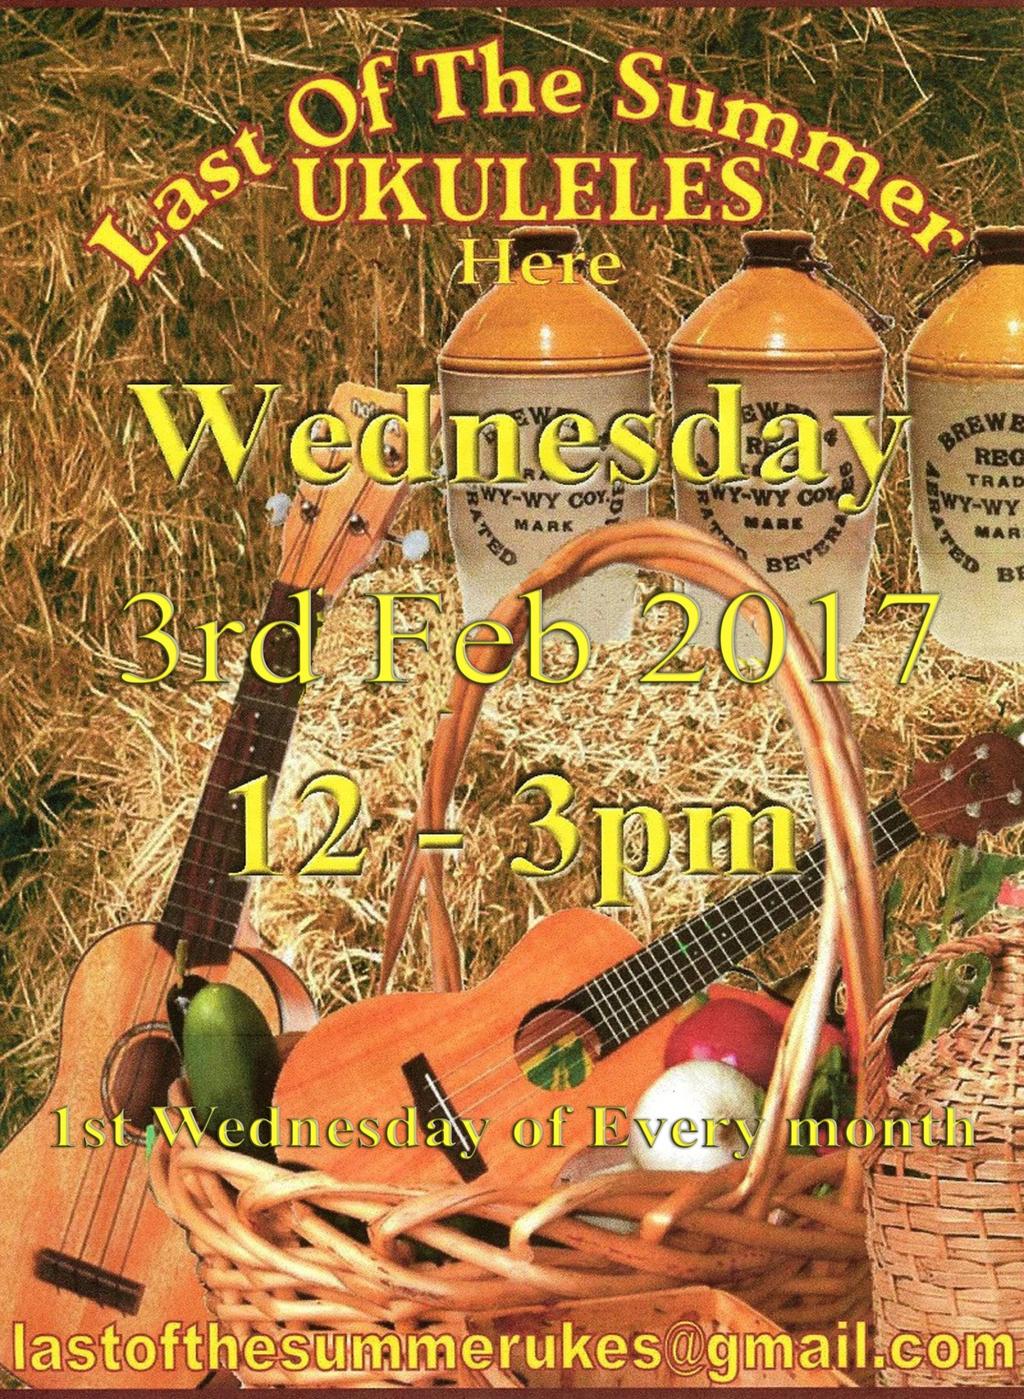 The Ukulele band that performed here last year in the afternoon, were so entertaining that they will be joining us every month from February onwards.